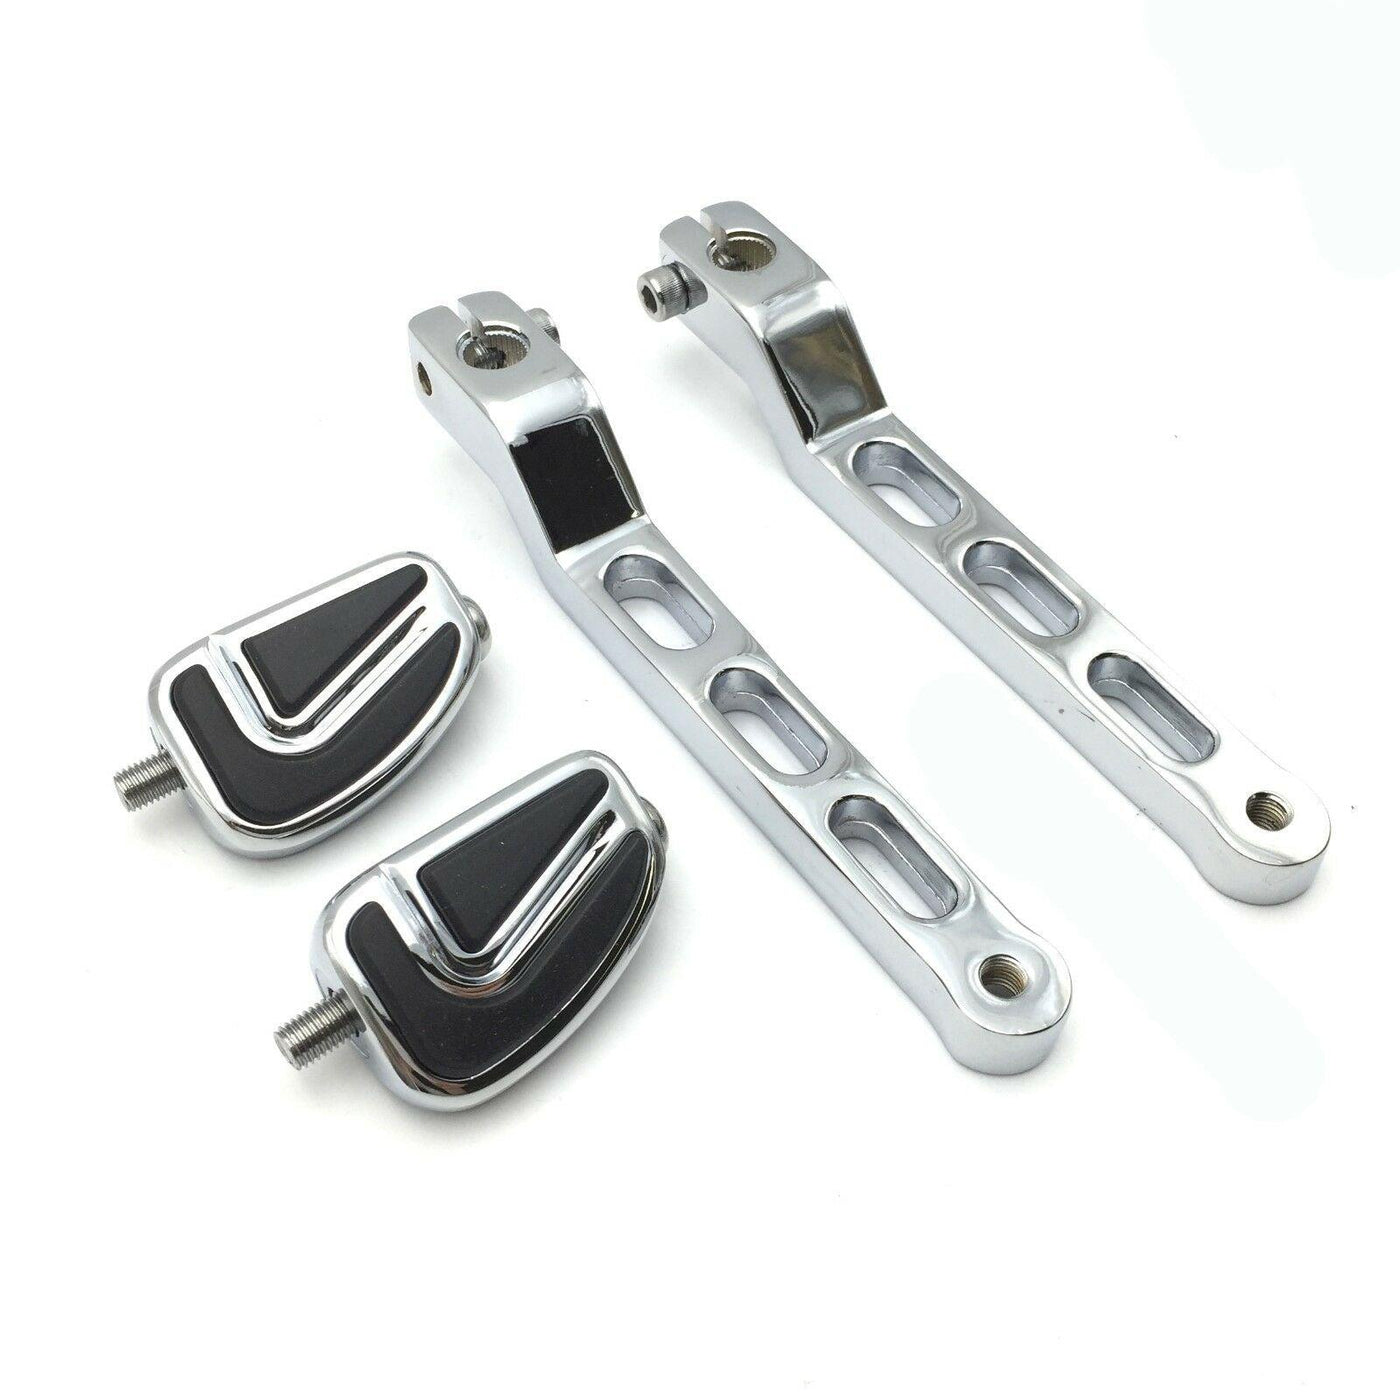 Cr AirFlow Shifter Peg For Harley FLS Fat Boy Road King FLHR CVO Street Glide - Moto Life Products